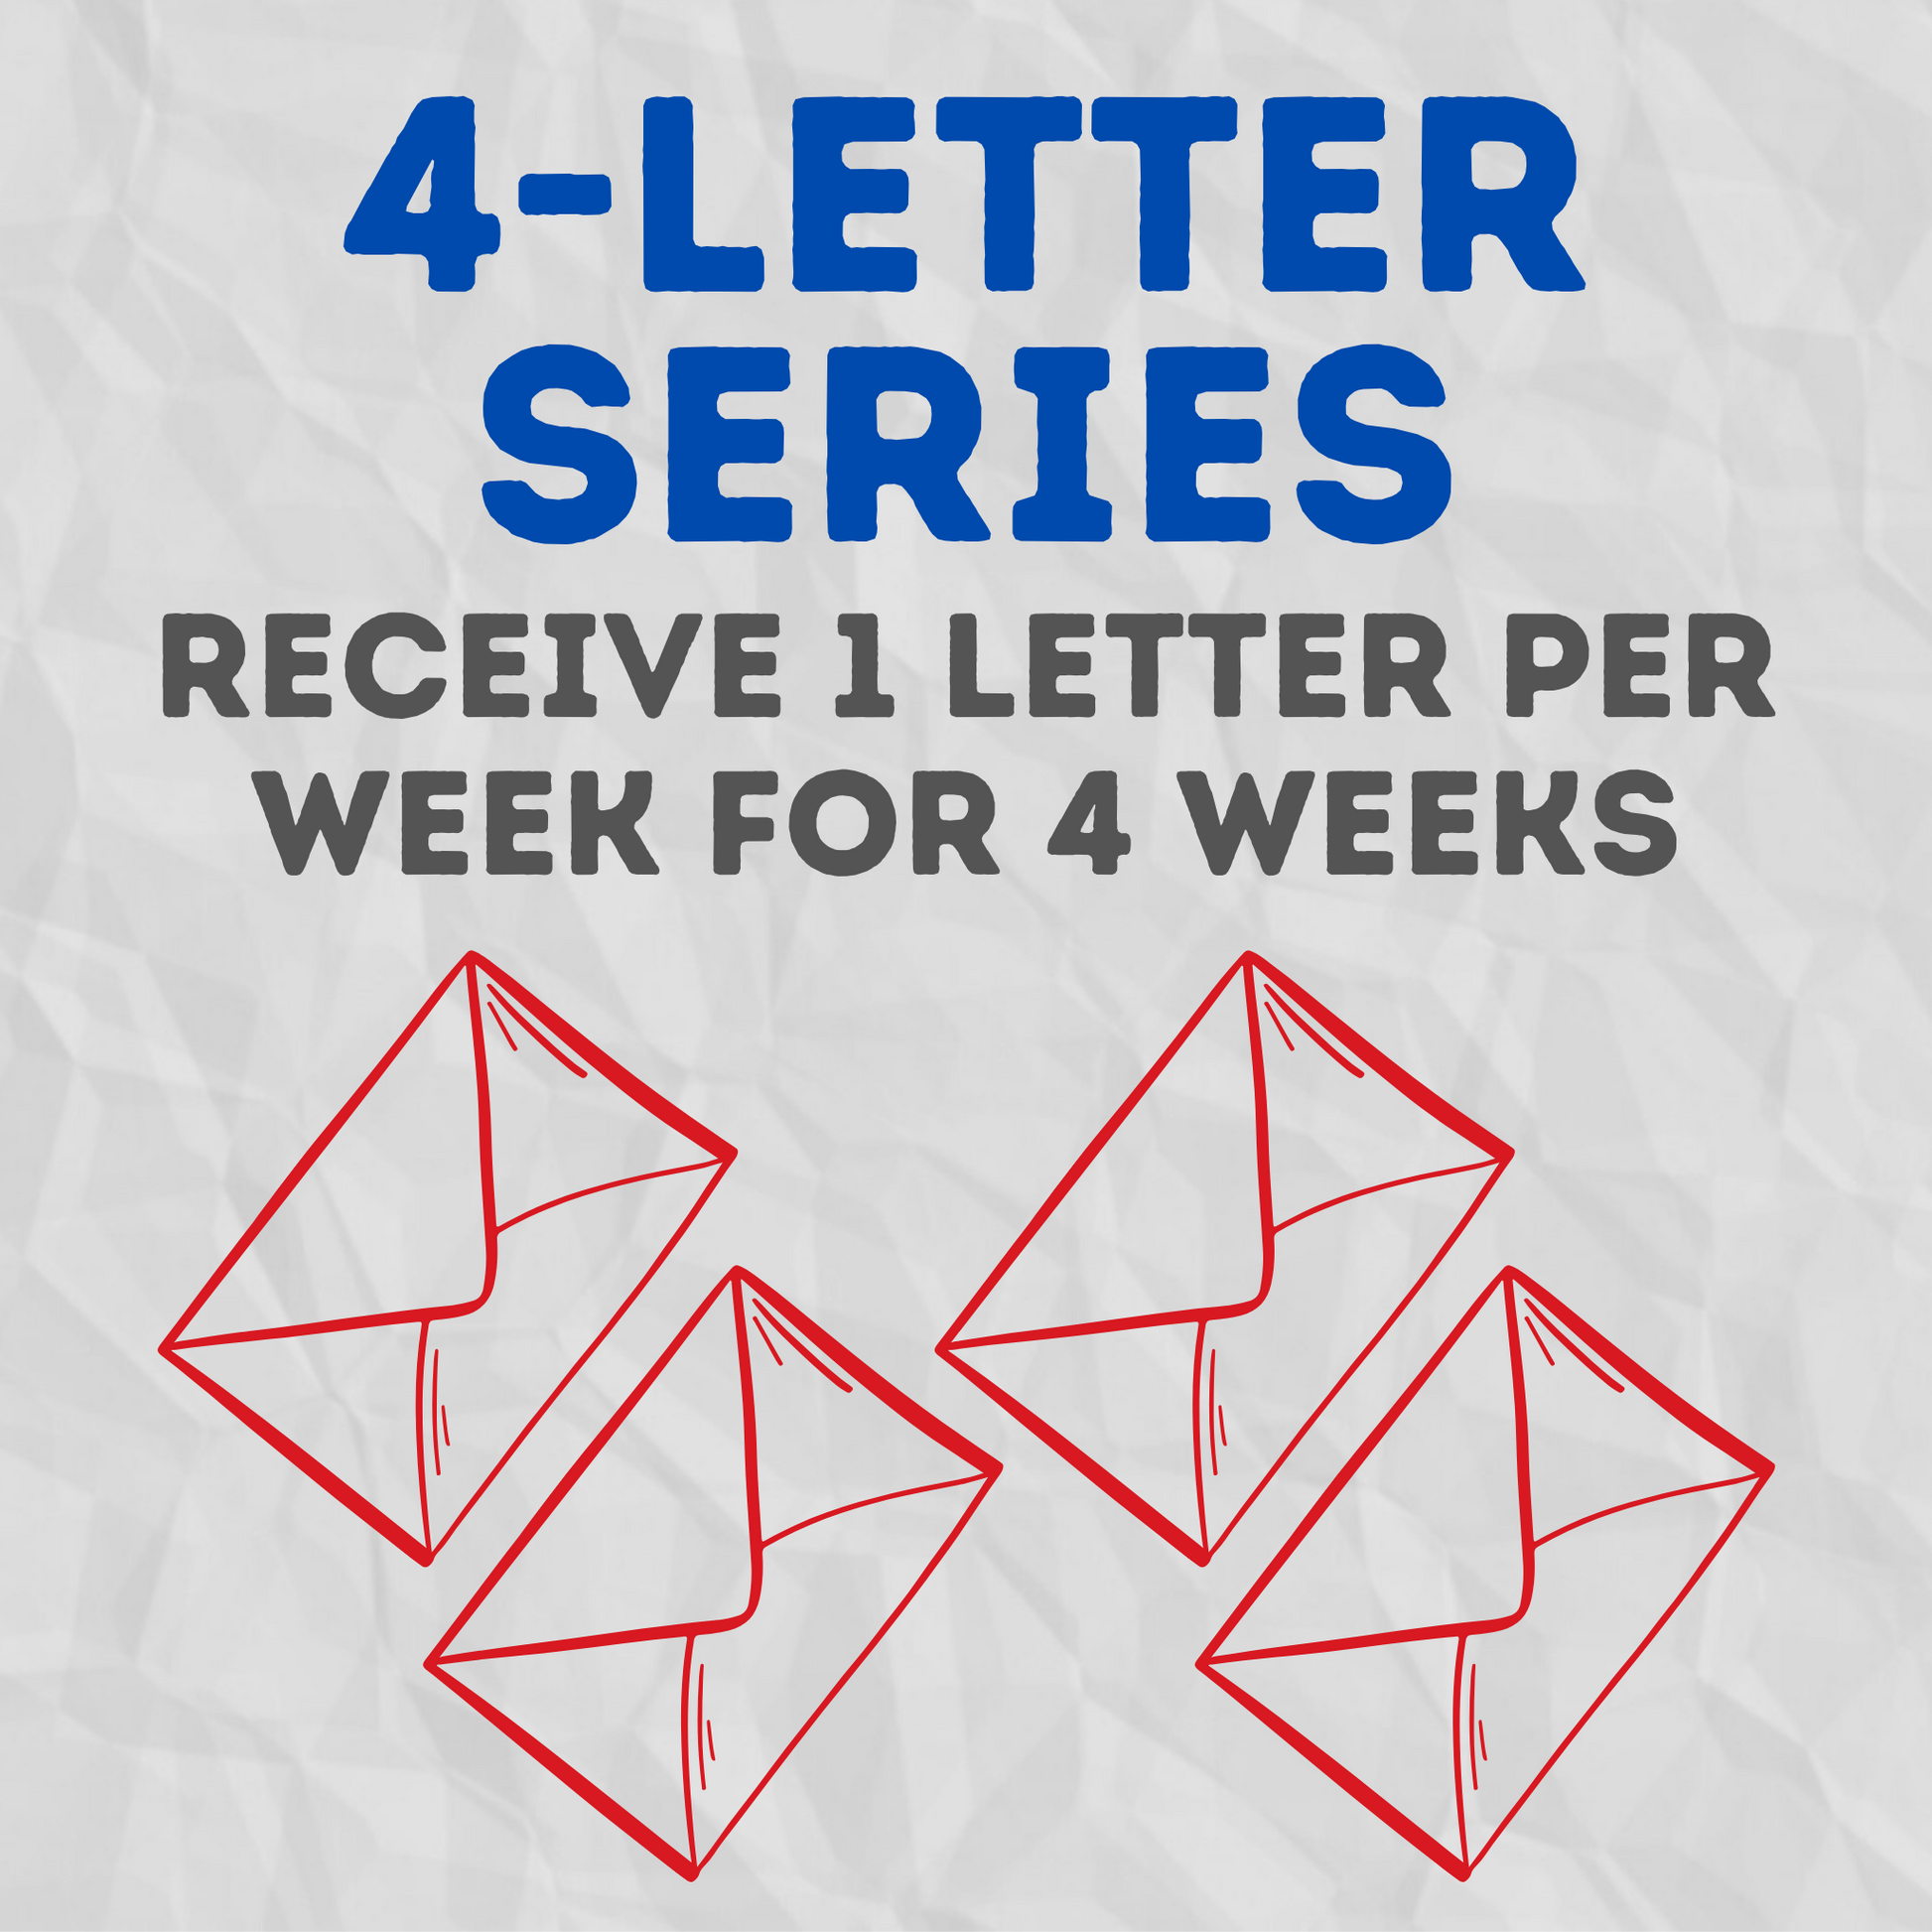 Fiction Mail 4-Letter Series - get one letter per week for 4 weeks from a fictional friend who has an amazing story to tell you.